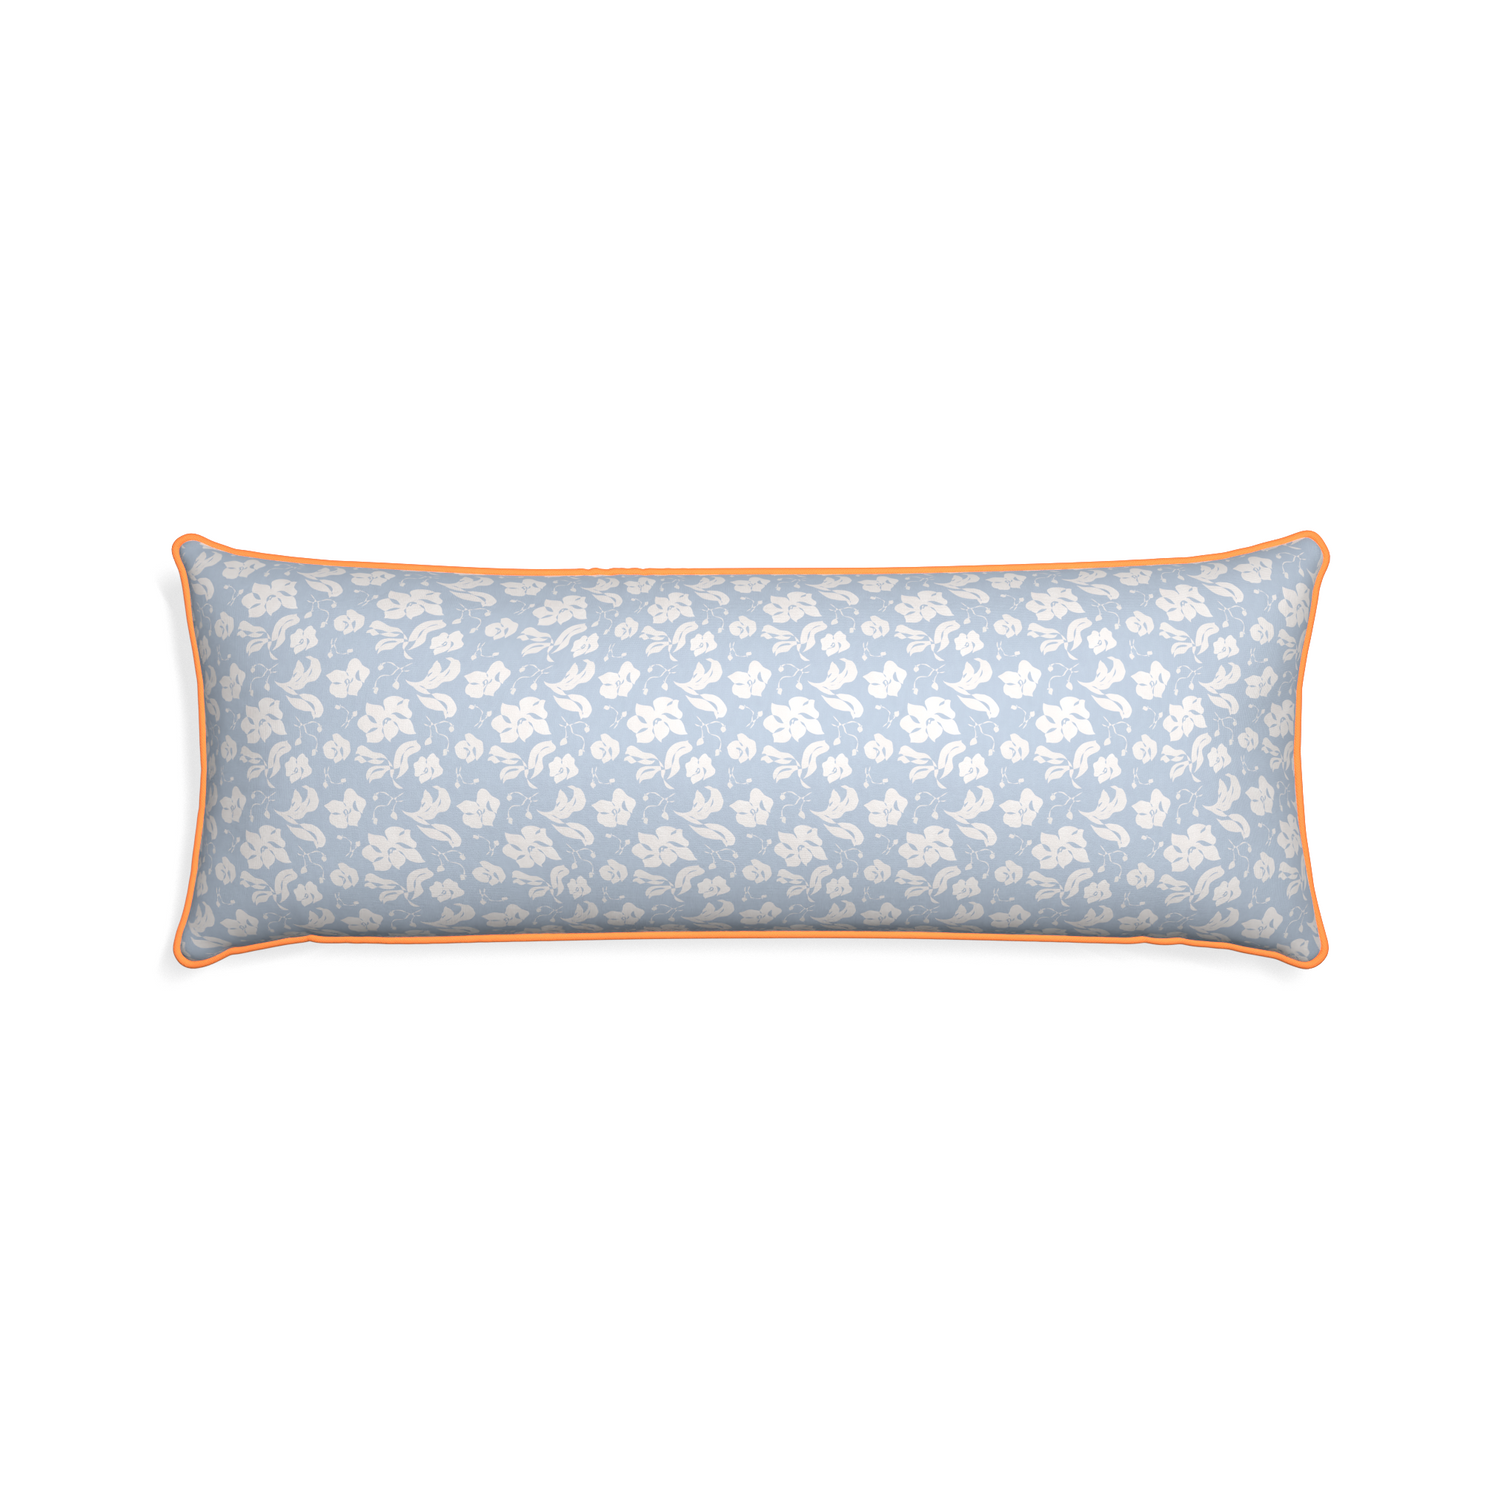 Xl-lumbar georgia custom cornflower blue floralpillow with clementine piping on white background